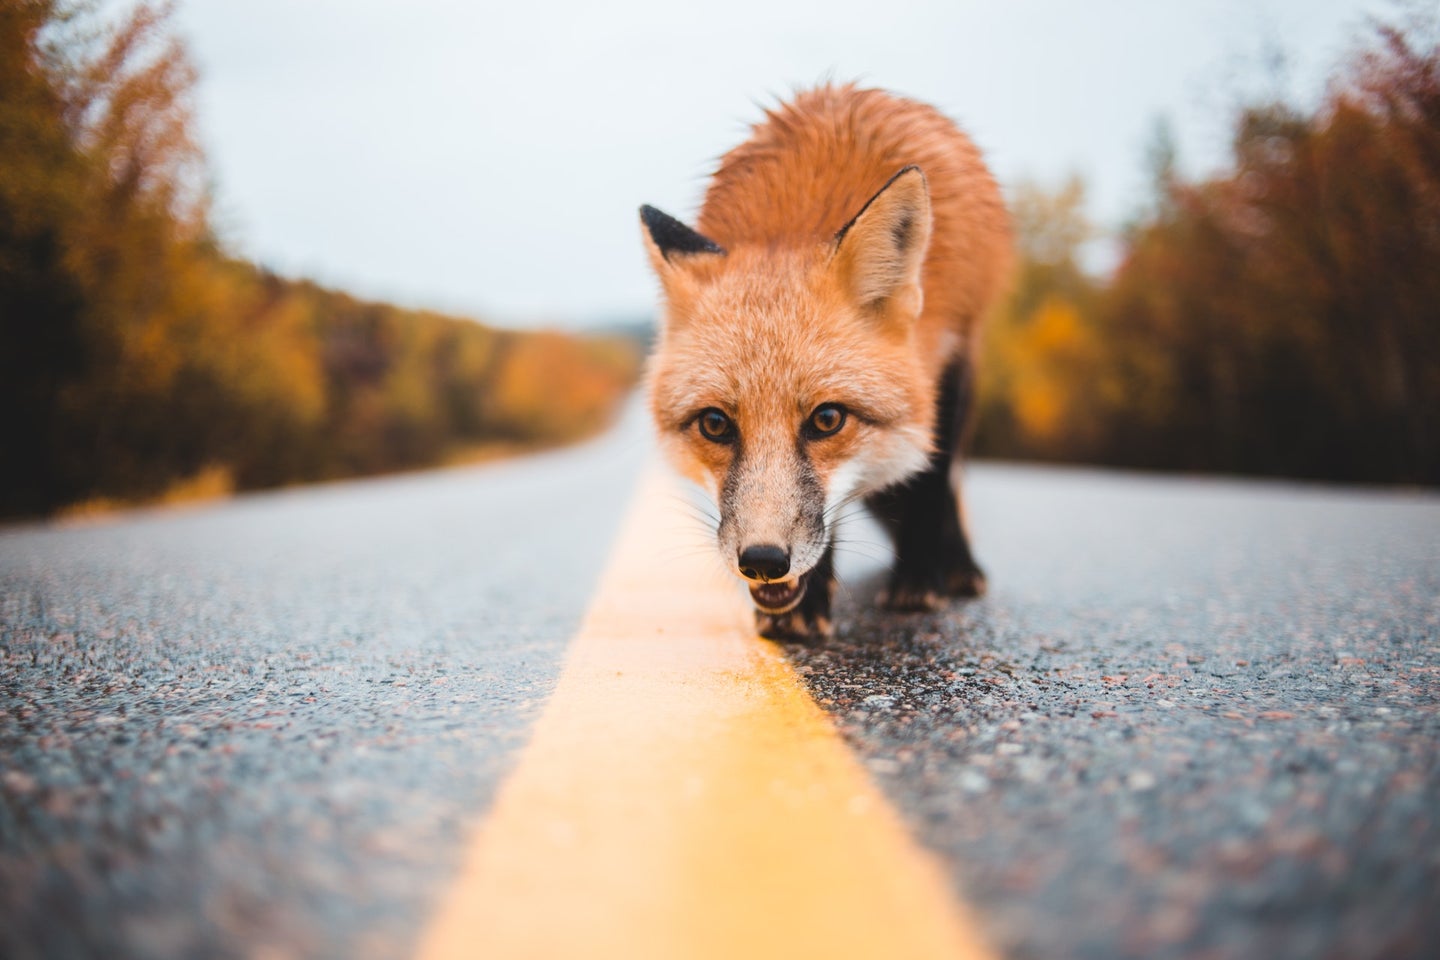 A fox on a street--it's not the rabid one.